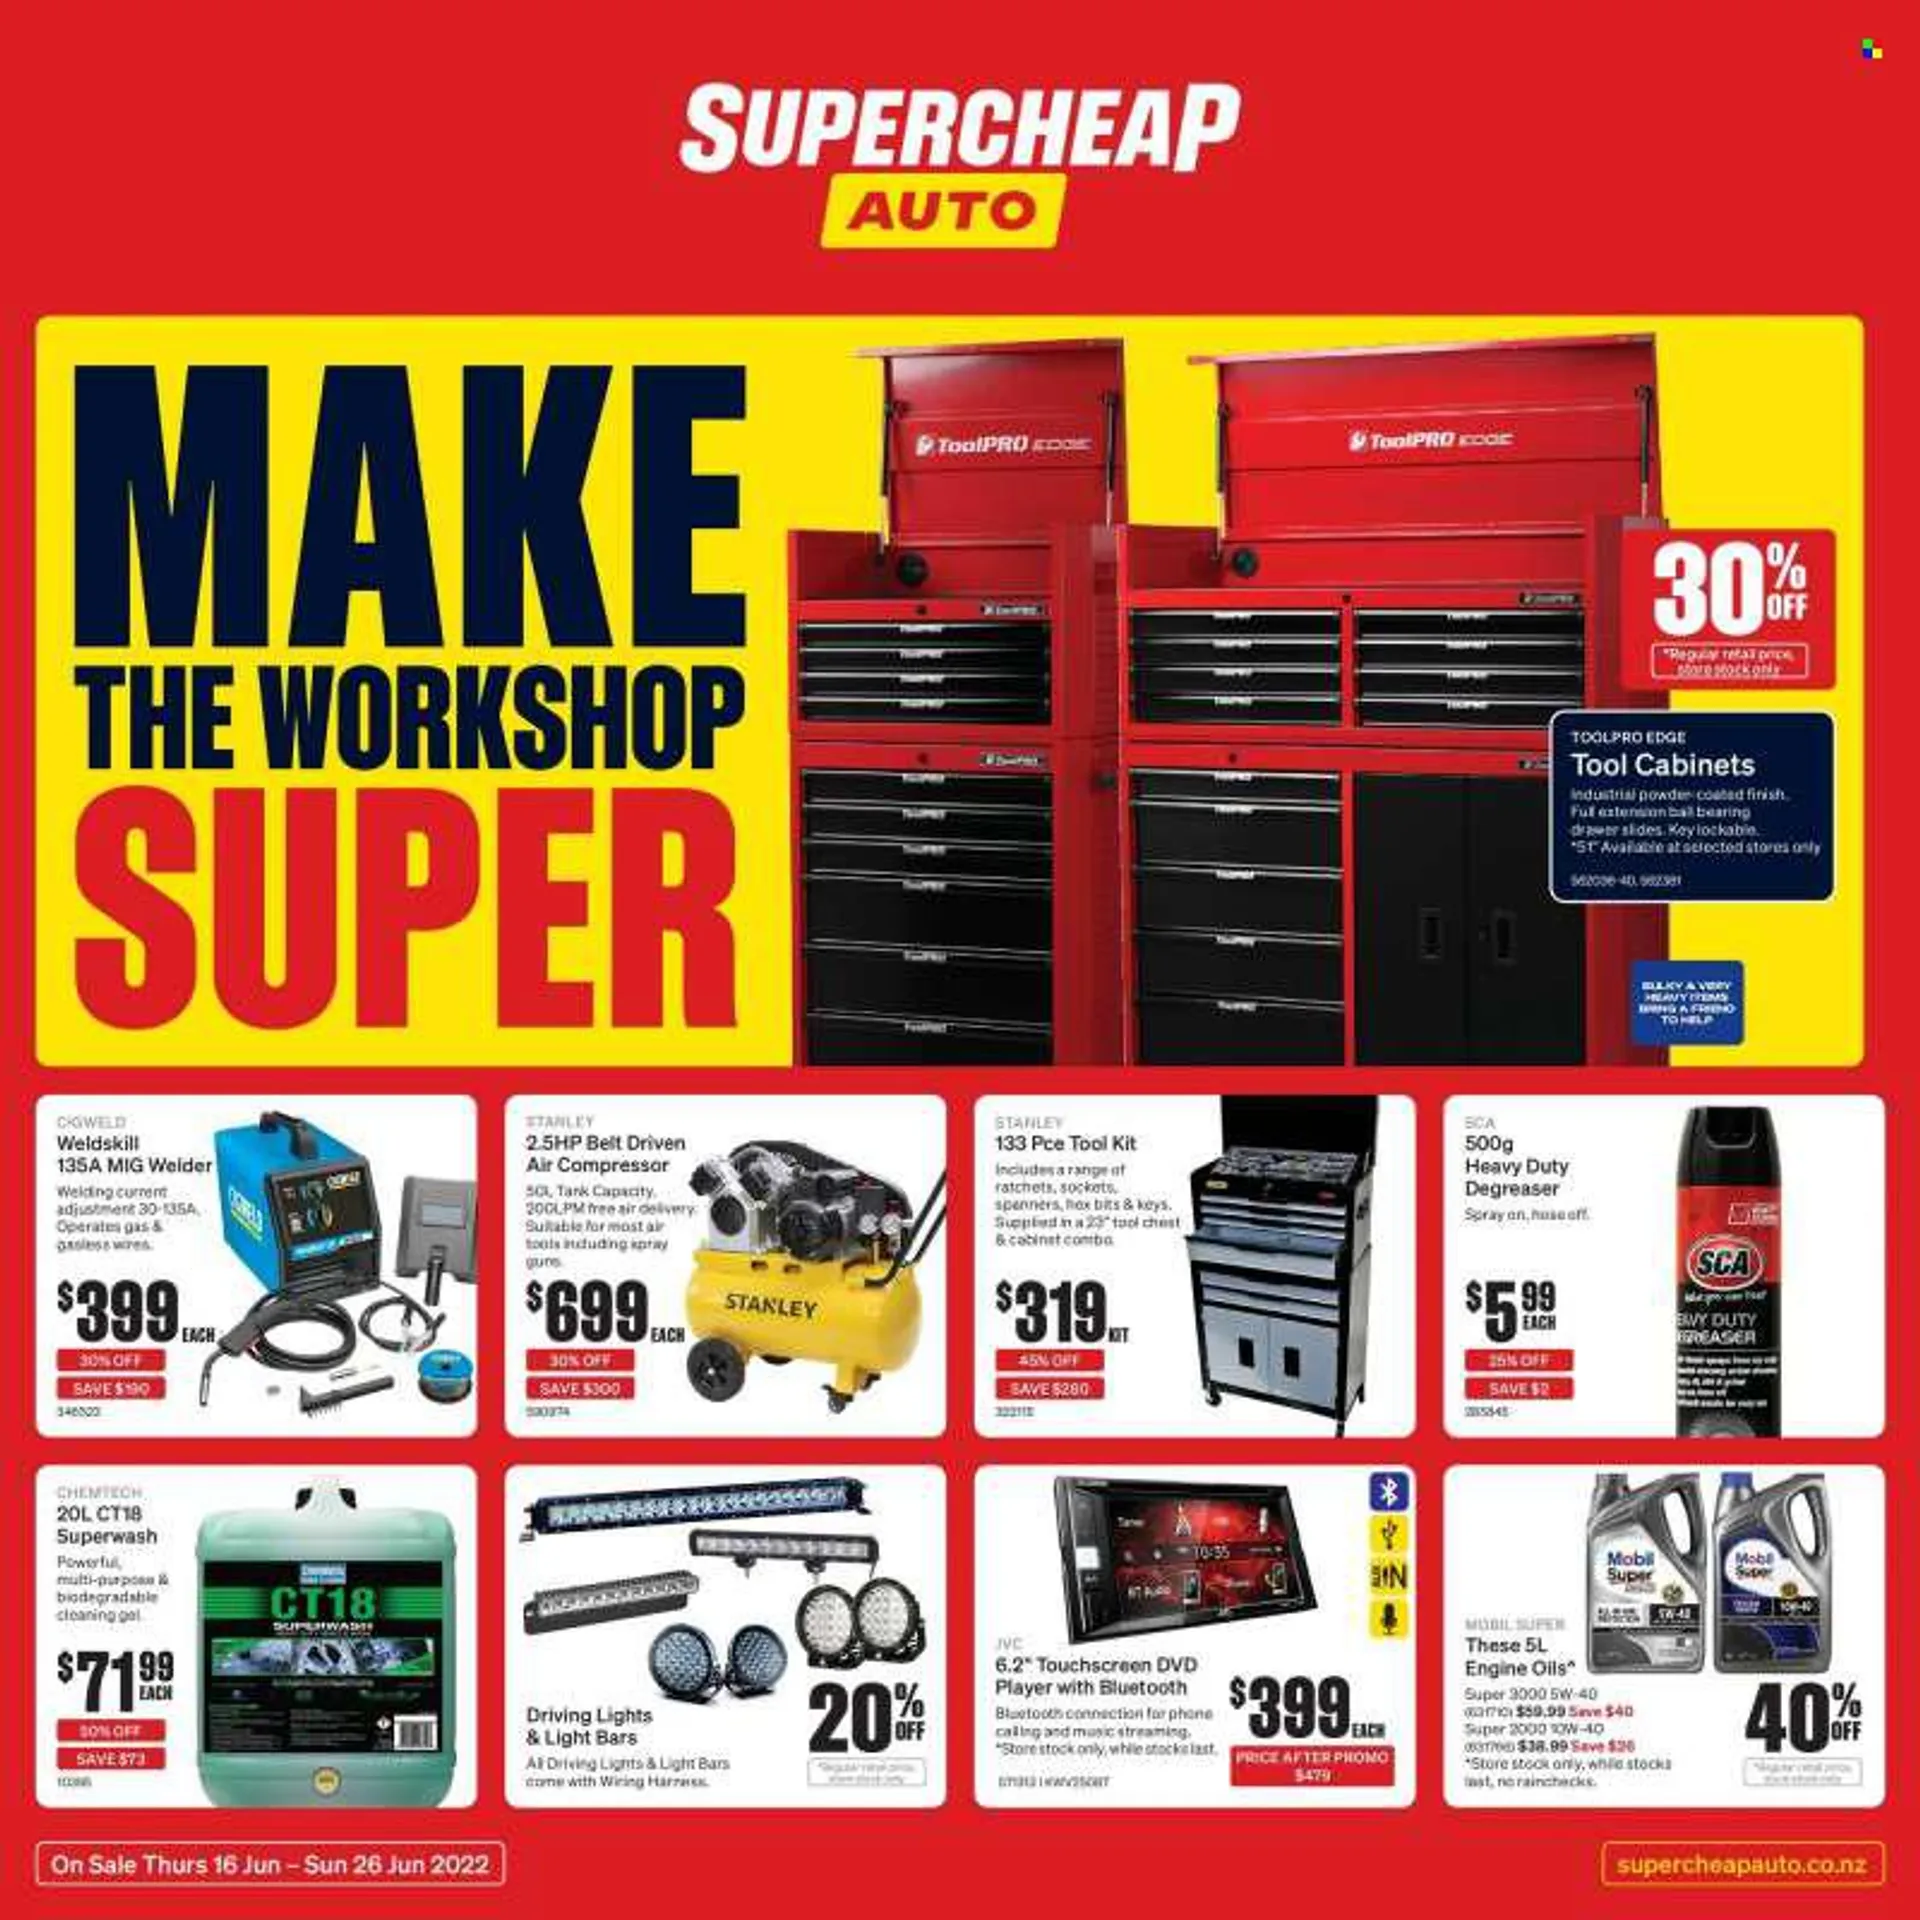 SuperCheap Auto mailer - 16.06.2022 - 26.06.2022 - Sales products - JVC, dvd player, Stanley, tool set, tool chest, air compressor, belt, cabinet, inverter welder, tool cabinets, welder, tank, driving lights, wiring harness, degreaser, Mobil. Page 1.